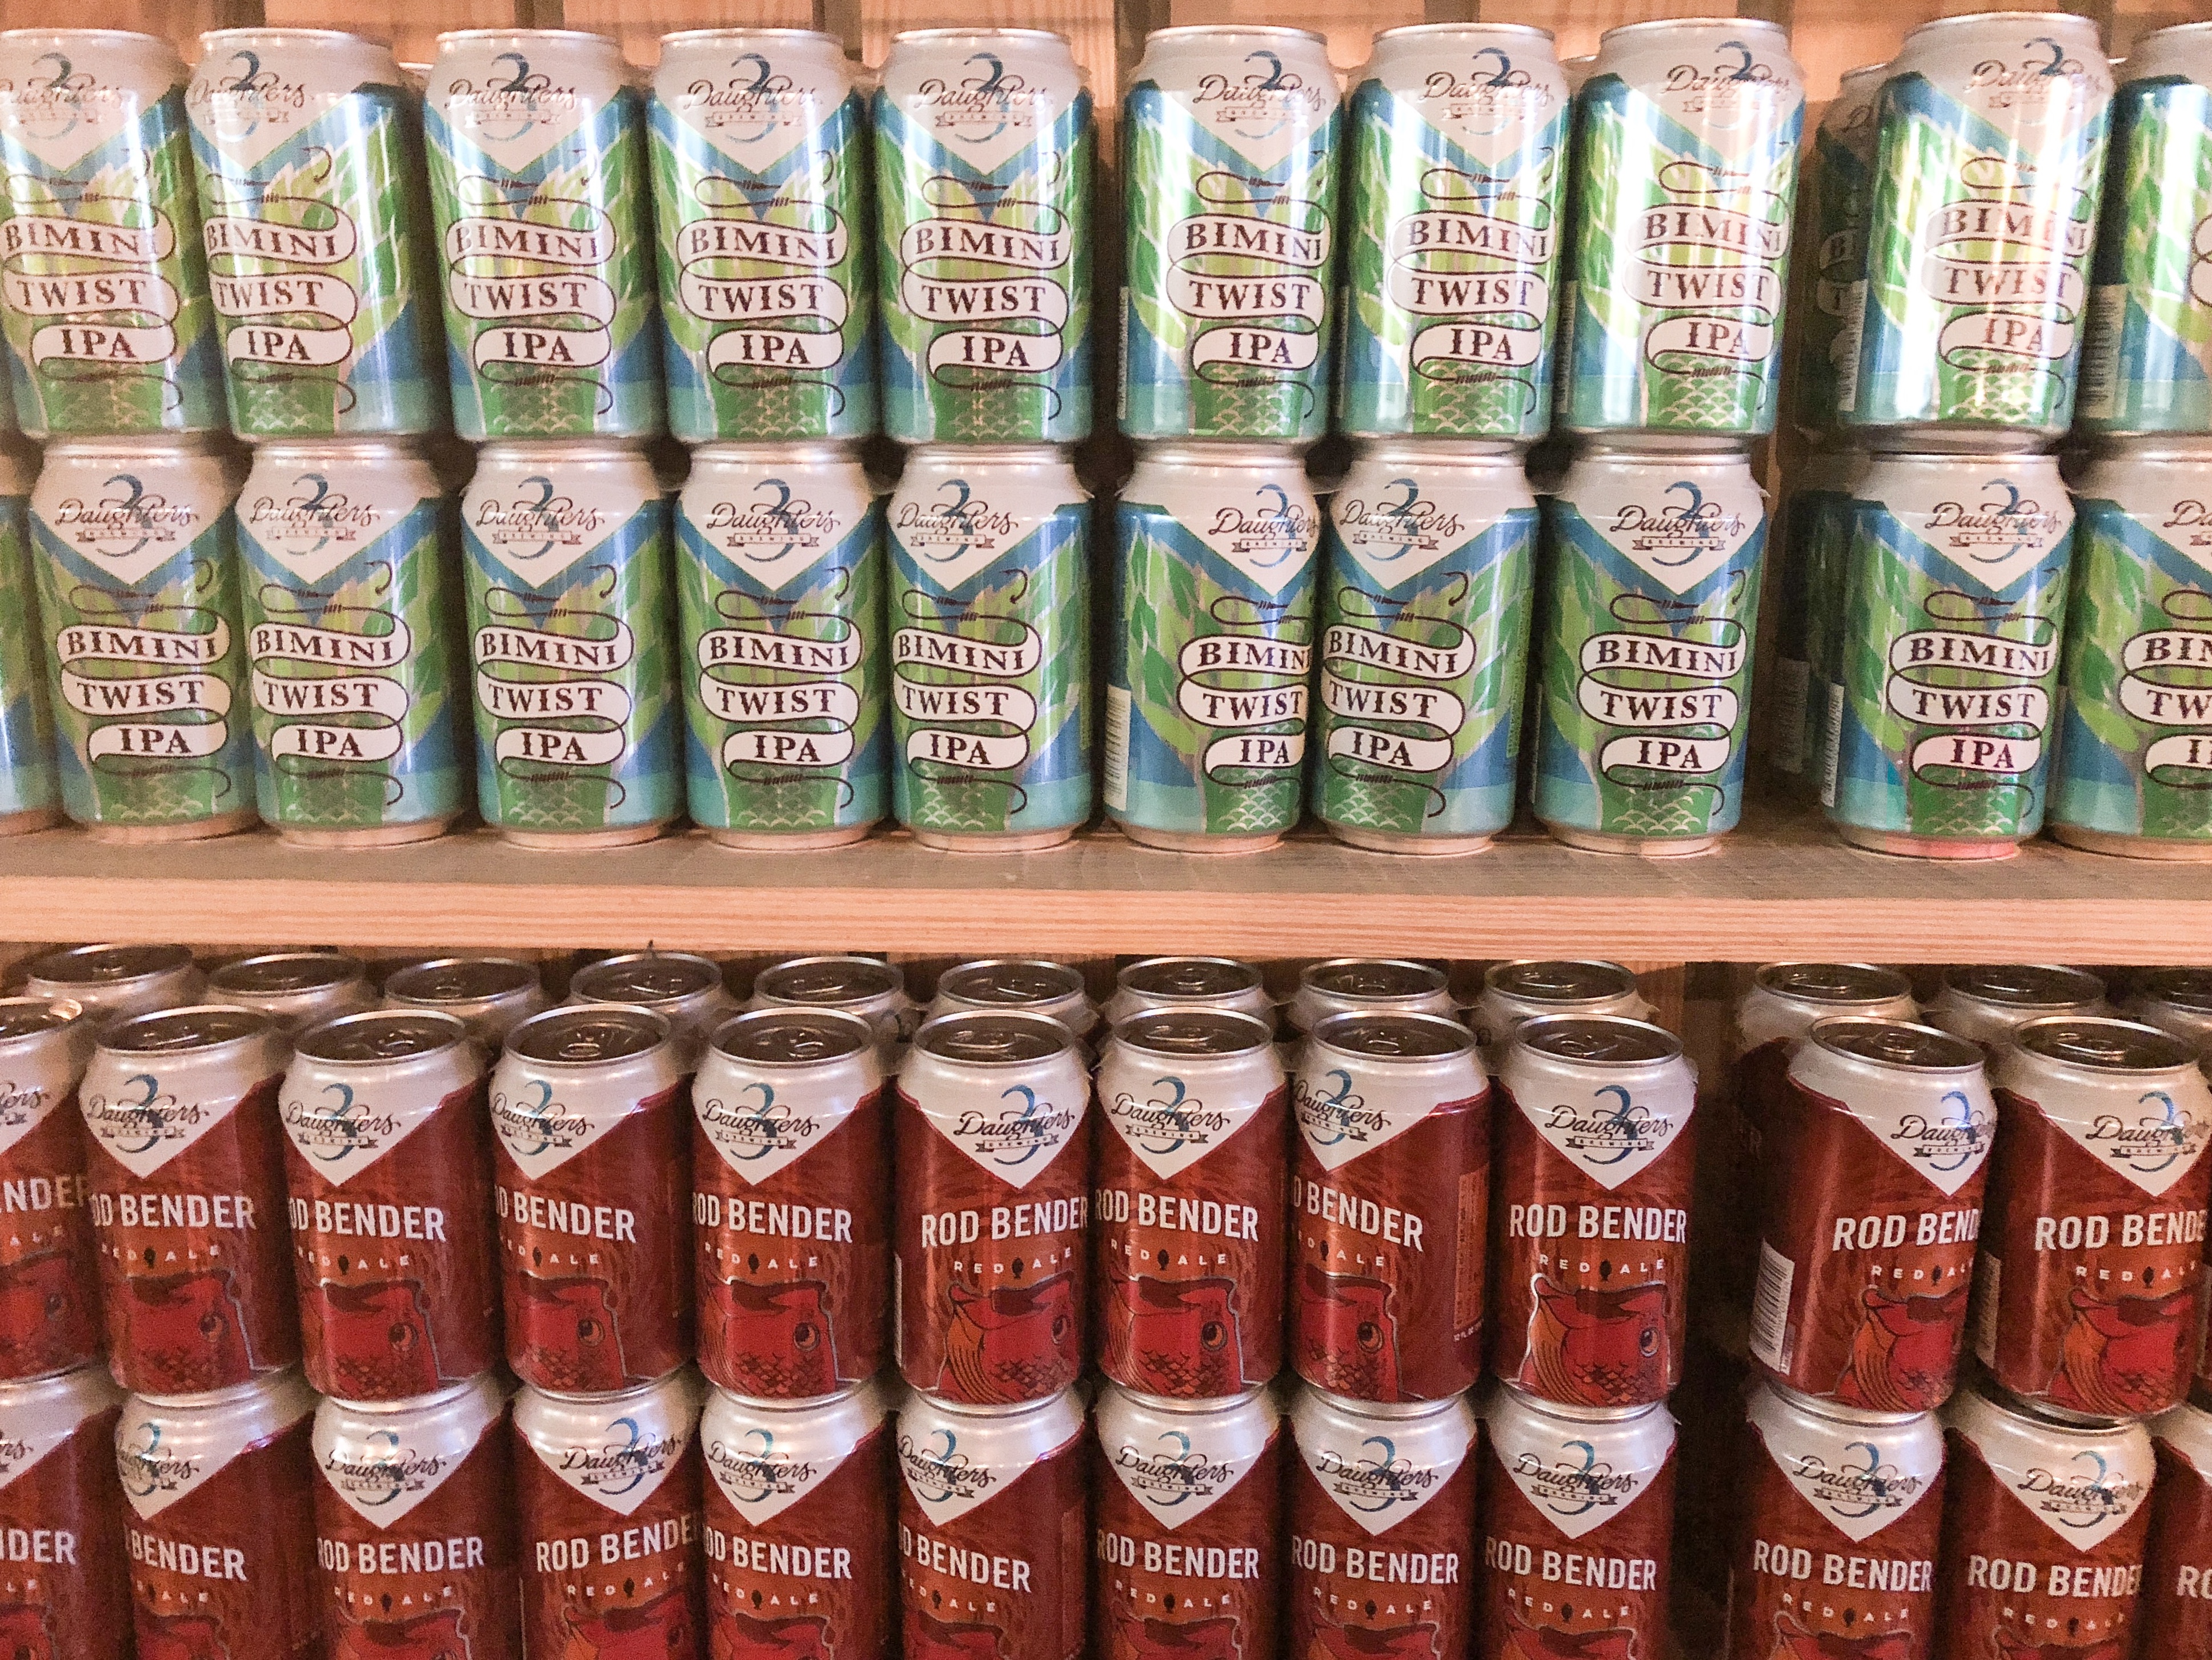 Cans in the tasting room